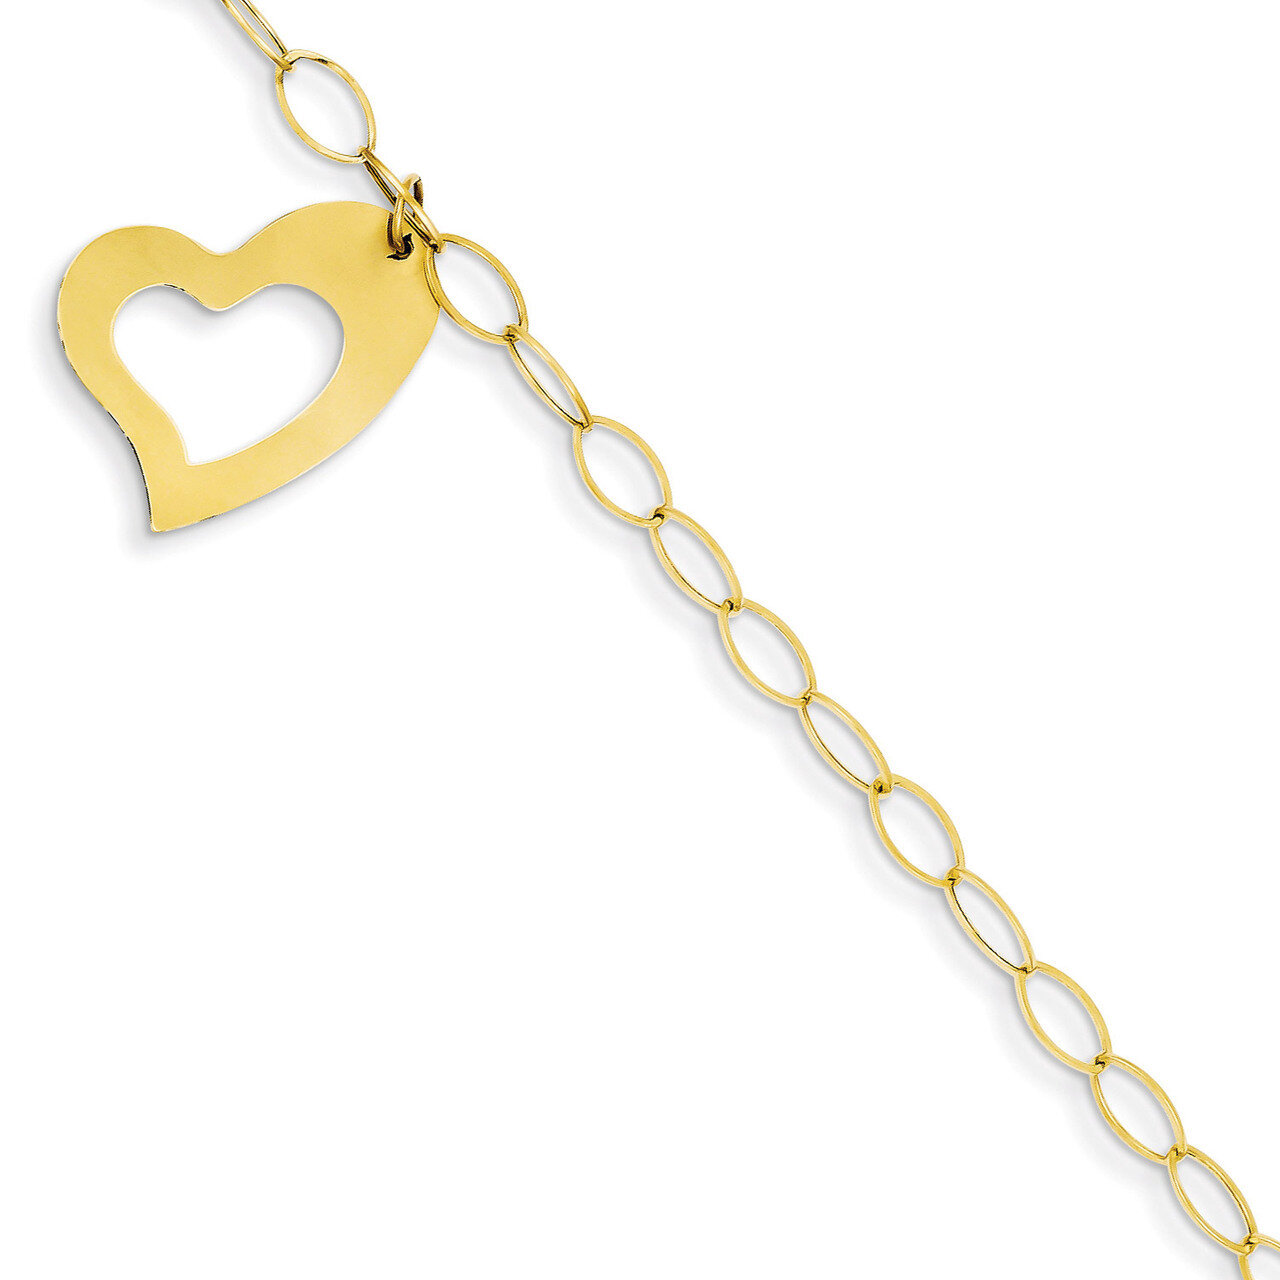 Oval Link Open Chain with Heart Bracelet 7.5 Inch 14k Gold FB1355-7.5